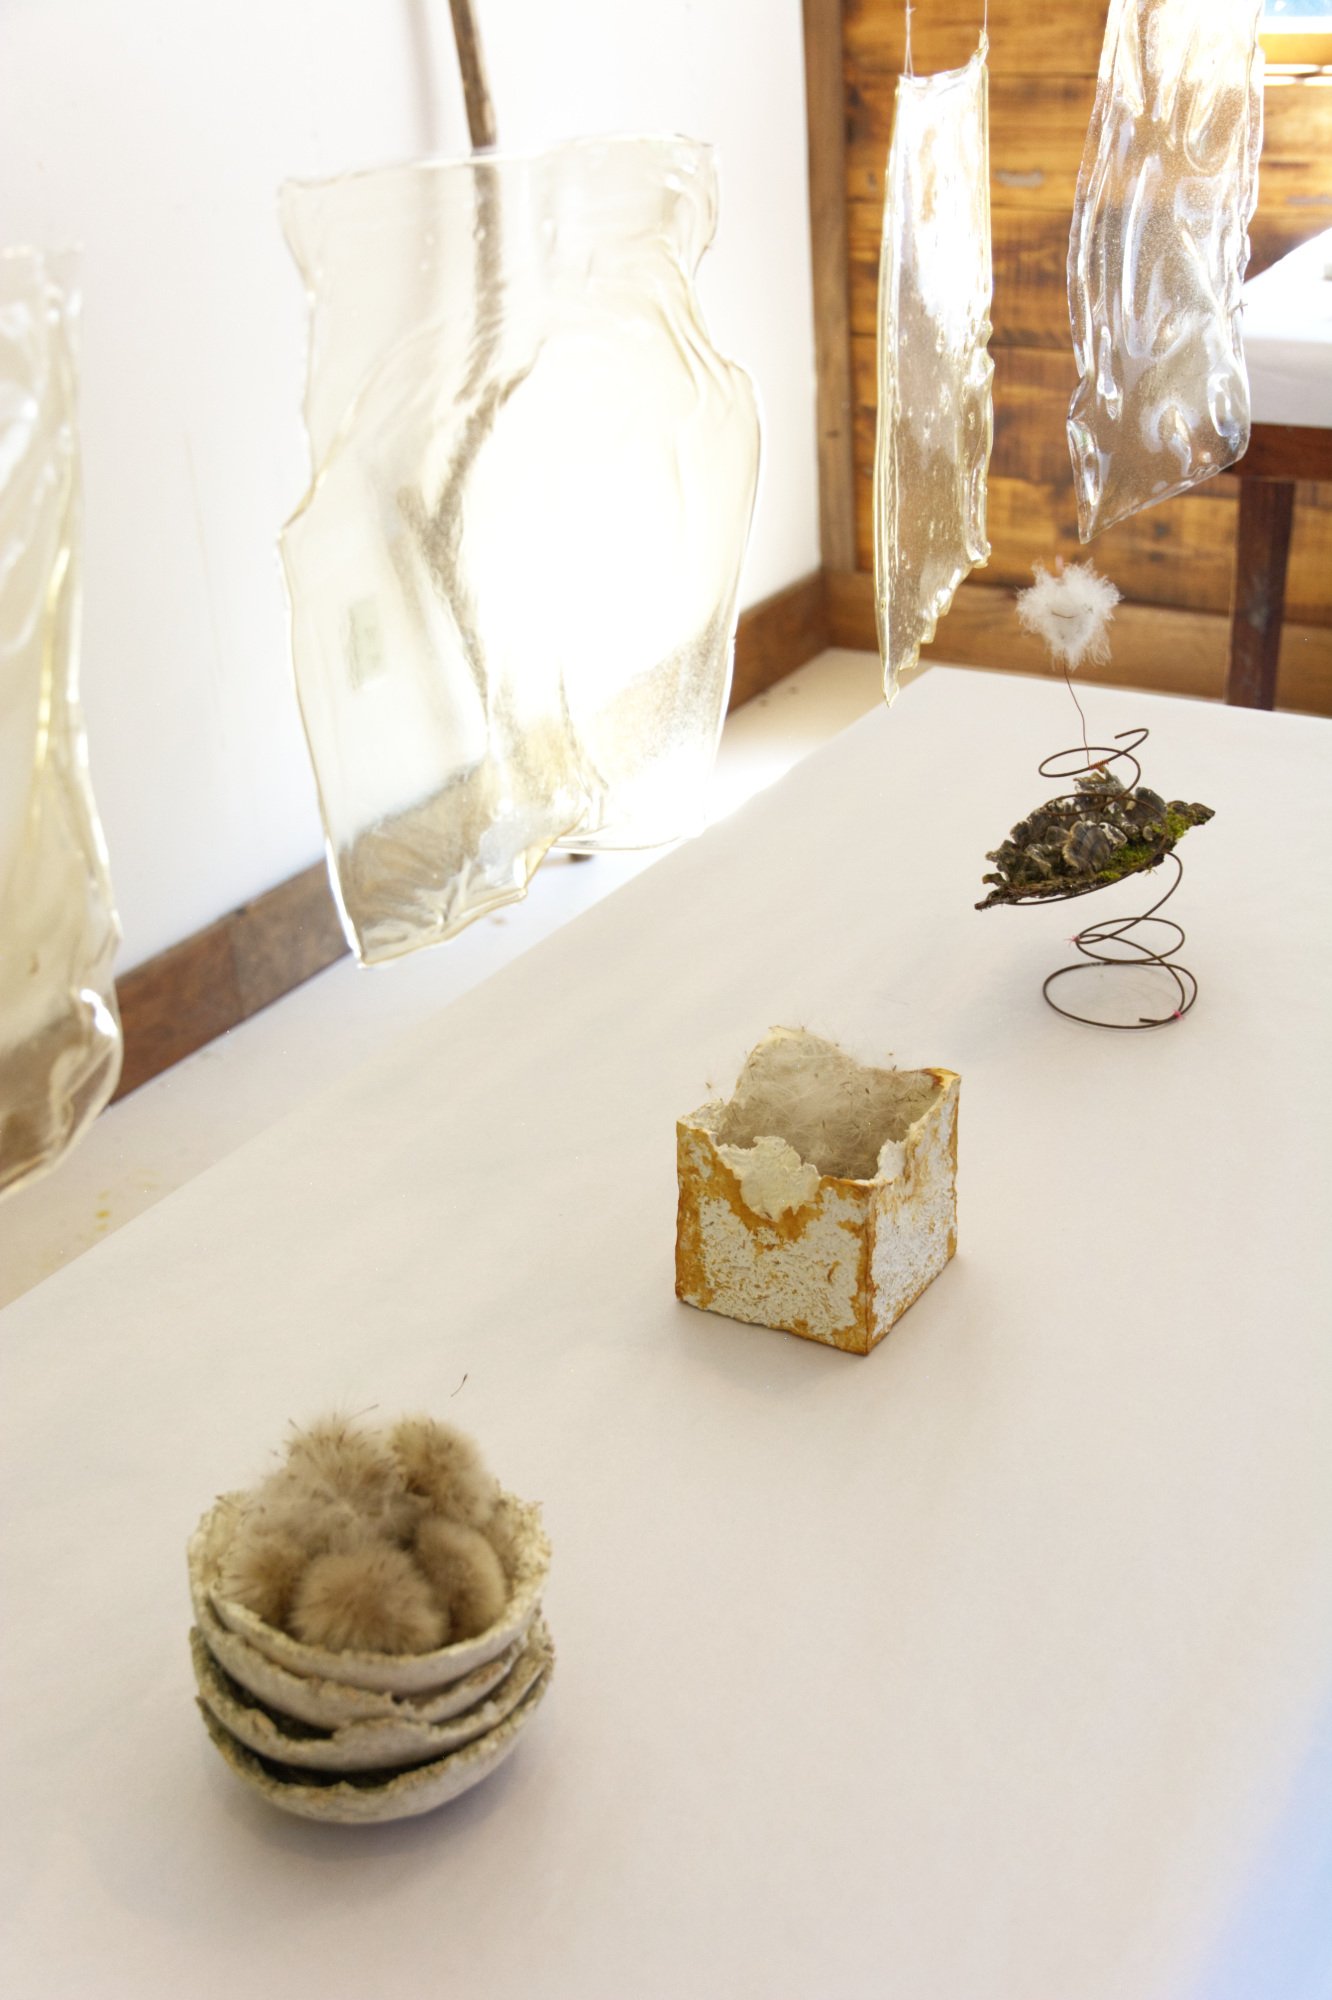  Kelly M O’Brien,  Materiality of Care , Upstate Art Weekend at Byrdcliffe, installation view. 2023 